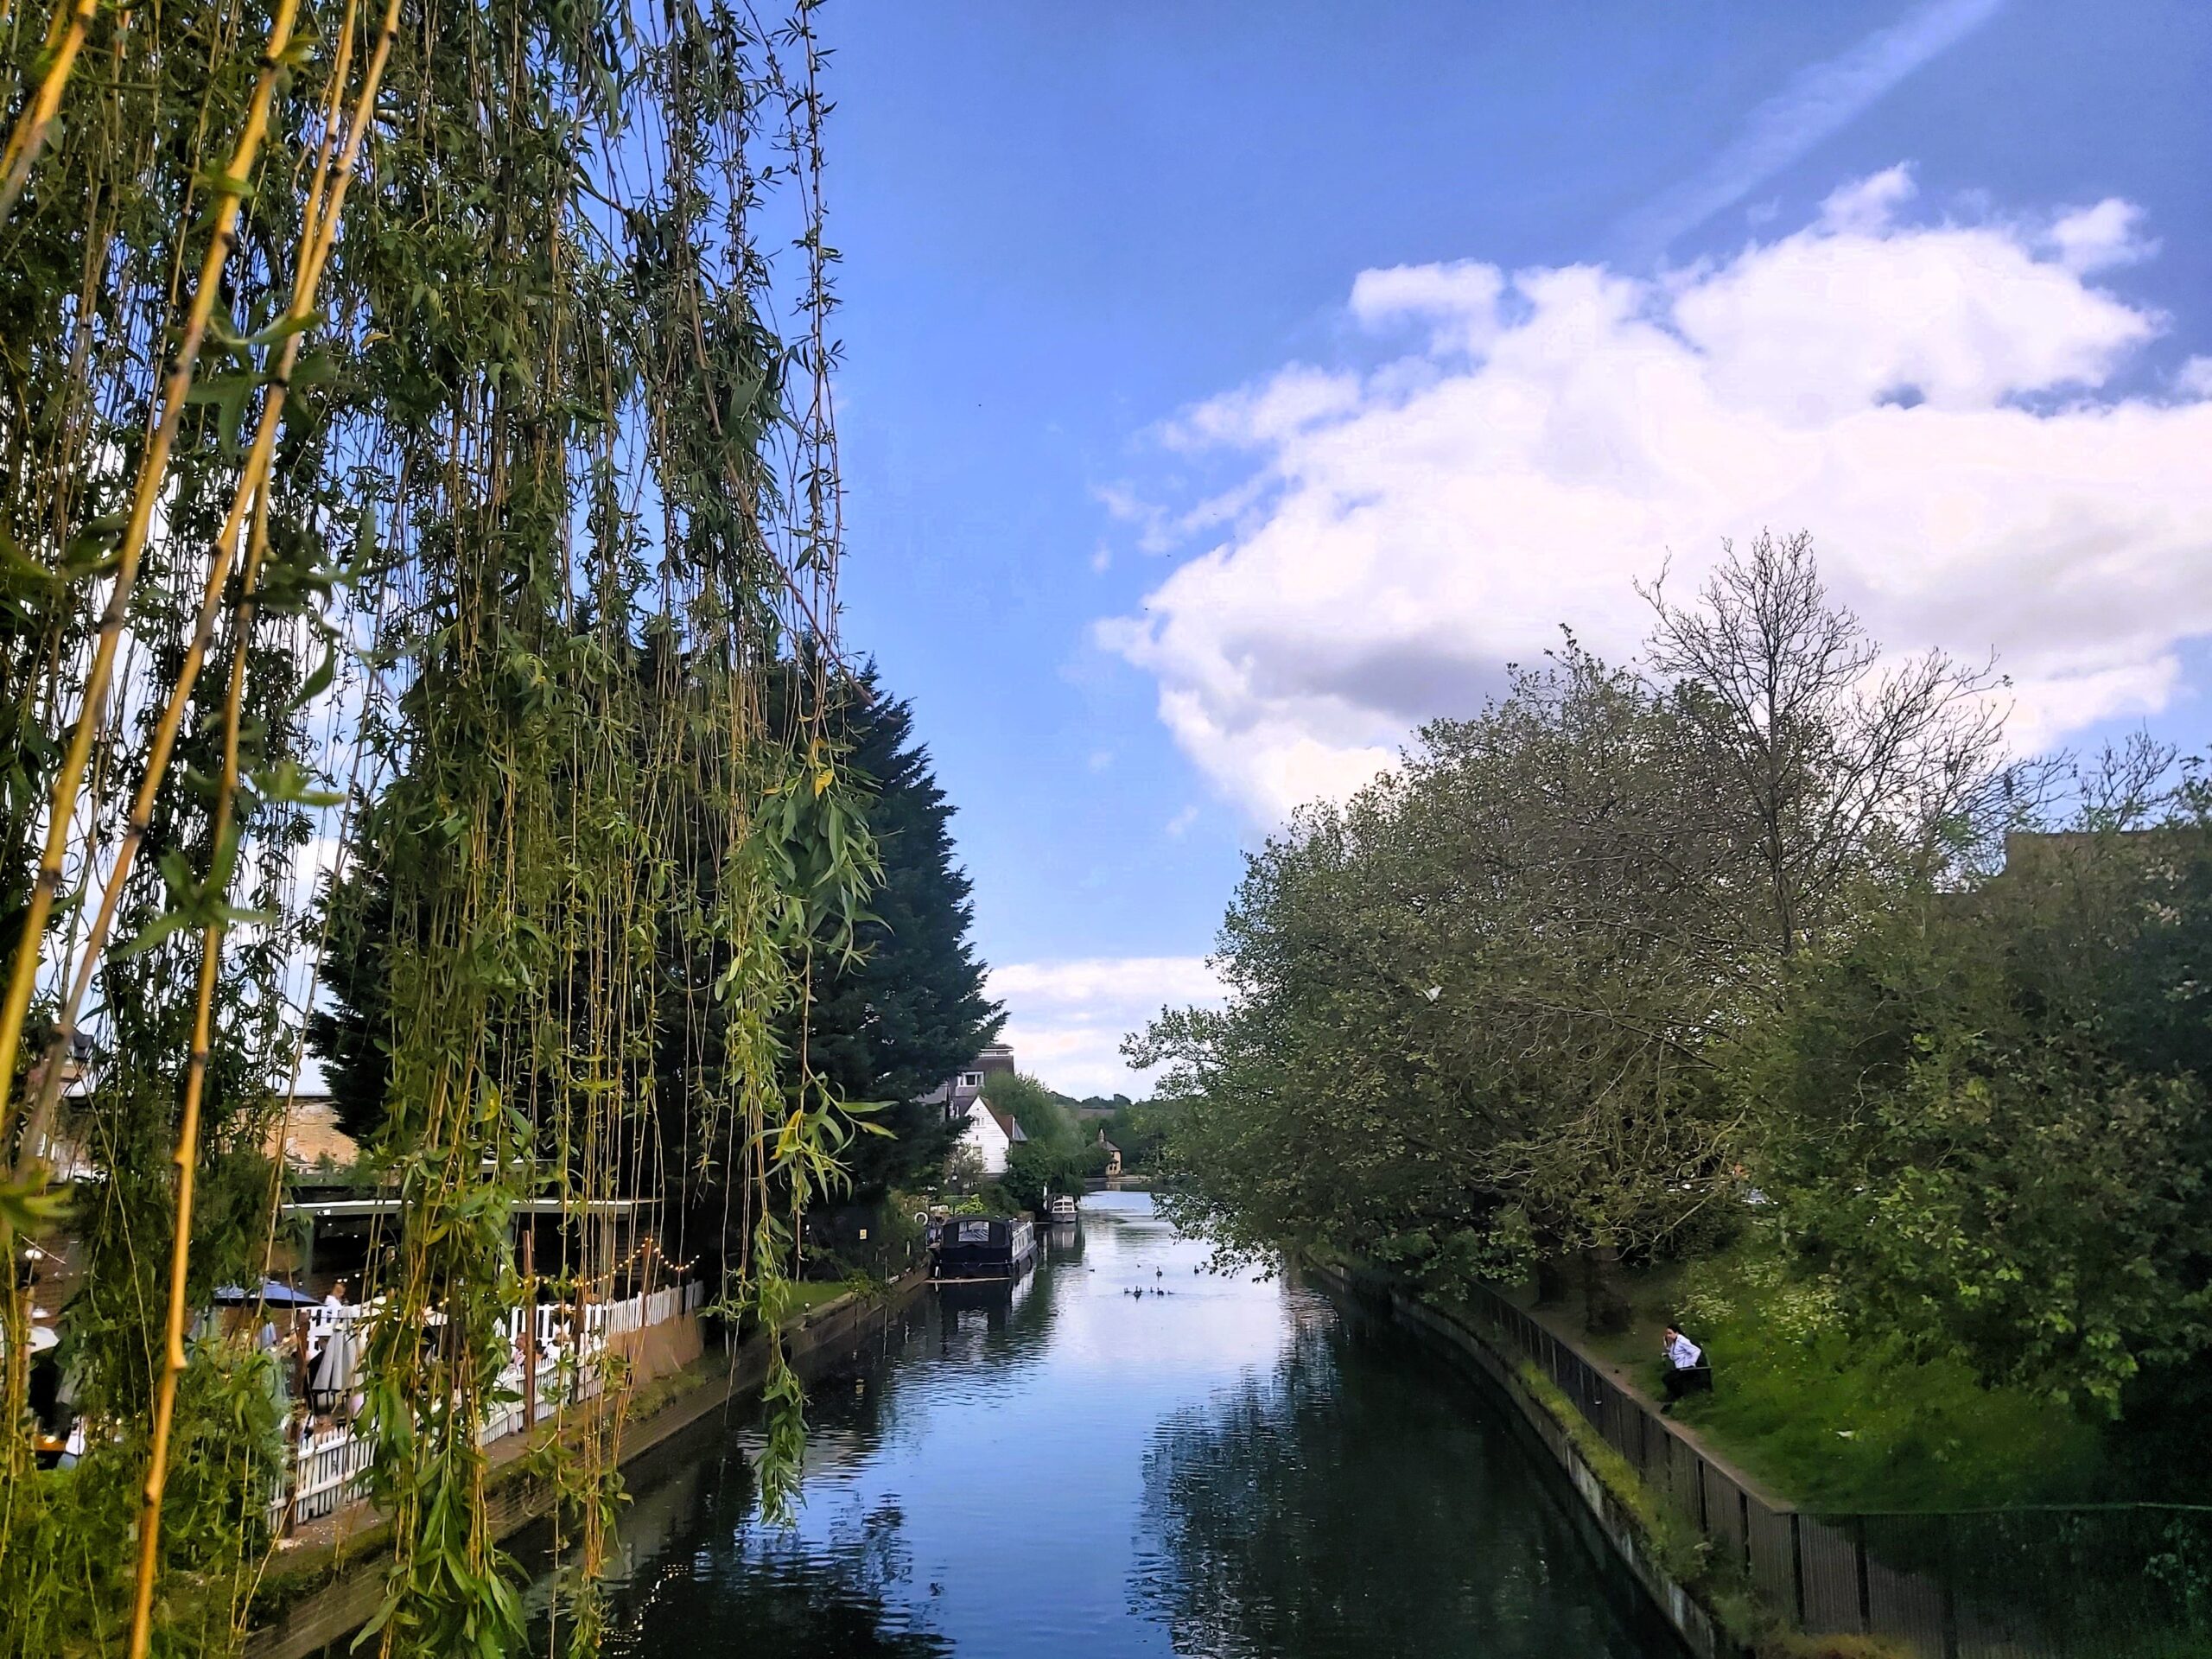 A river view of the River Lea, Ware, England